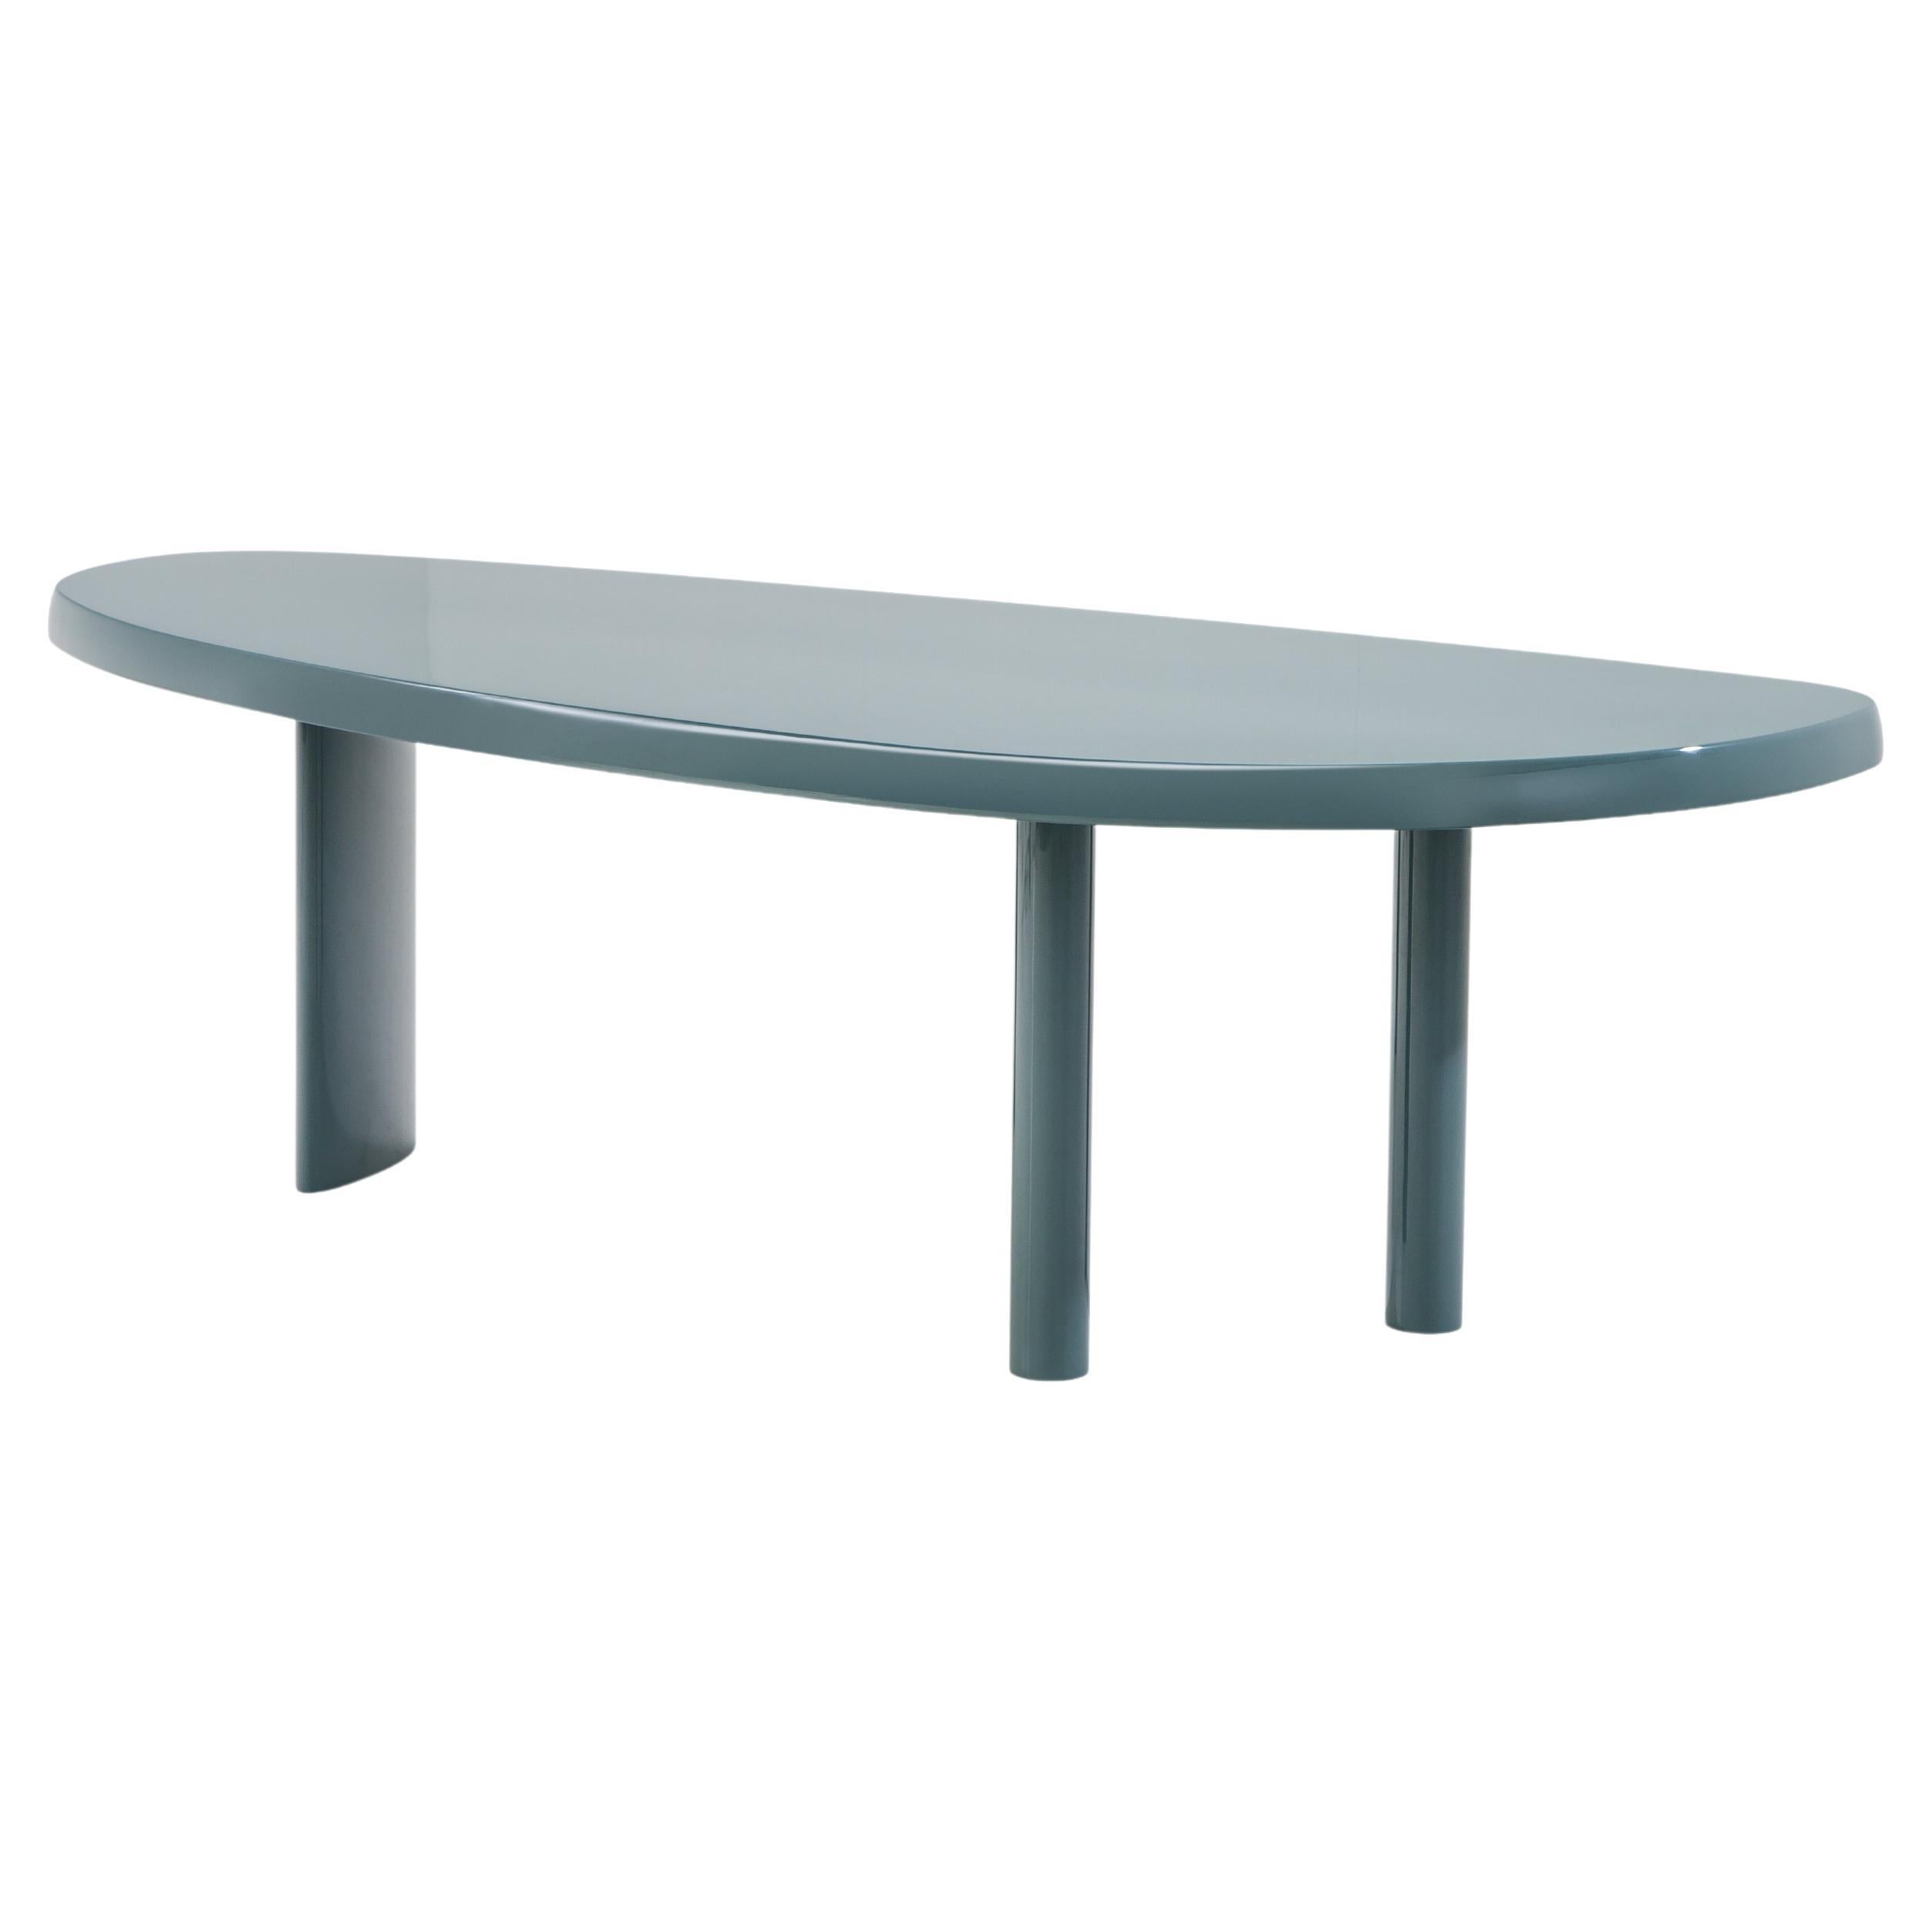 Charlotte Perriand Table En Forme Libre, Sage Green Lacquered Wood by Cassina For Sale